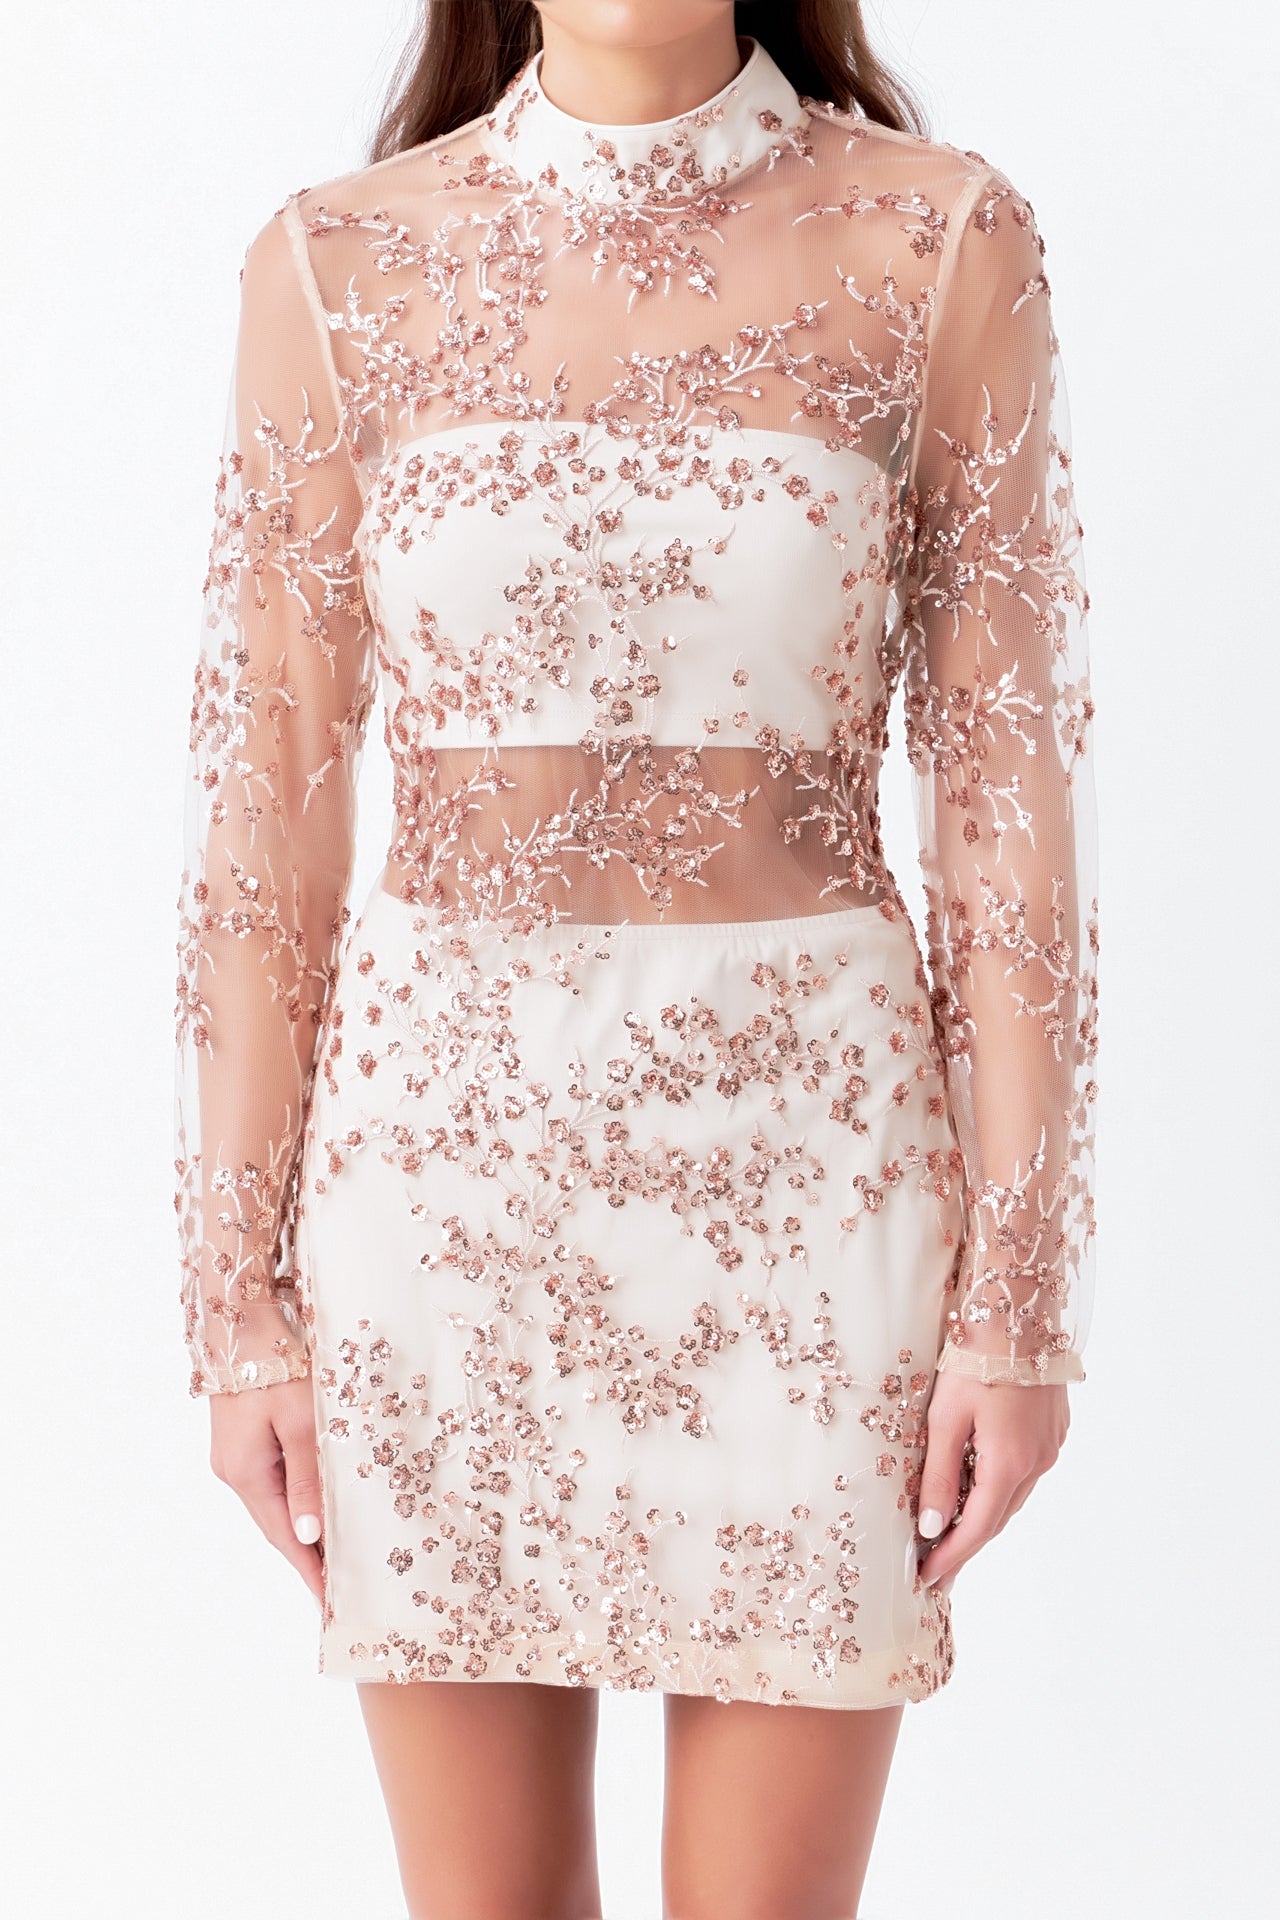 ENDLESS ROSE-Sequins Embroidered Mini Dress-DRESSES available at Objectrare